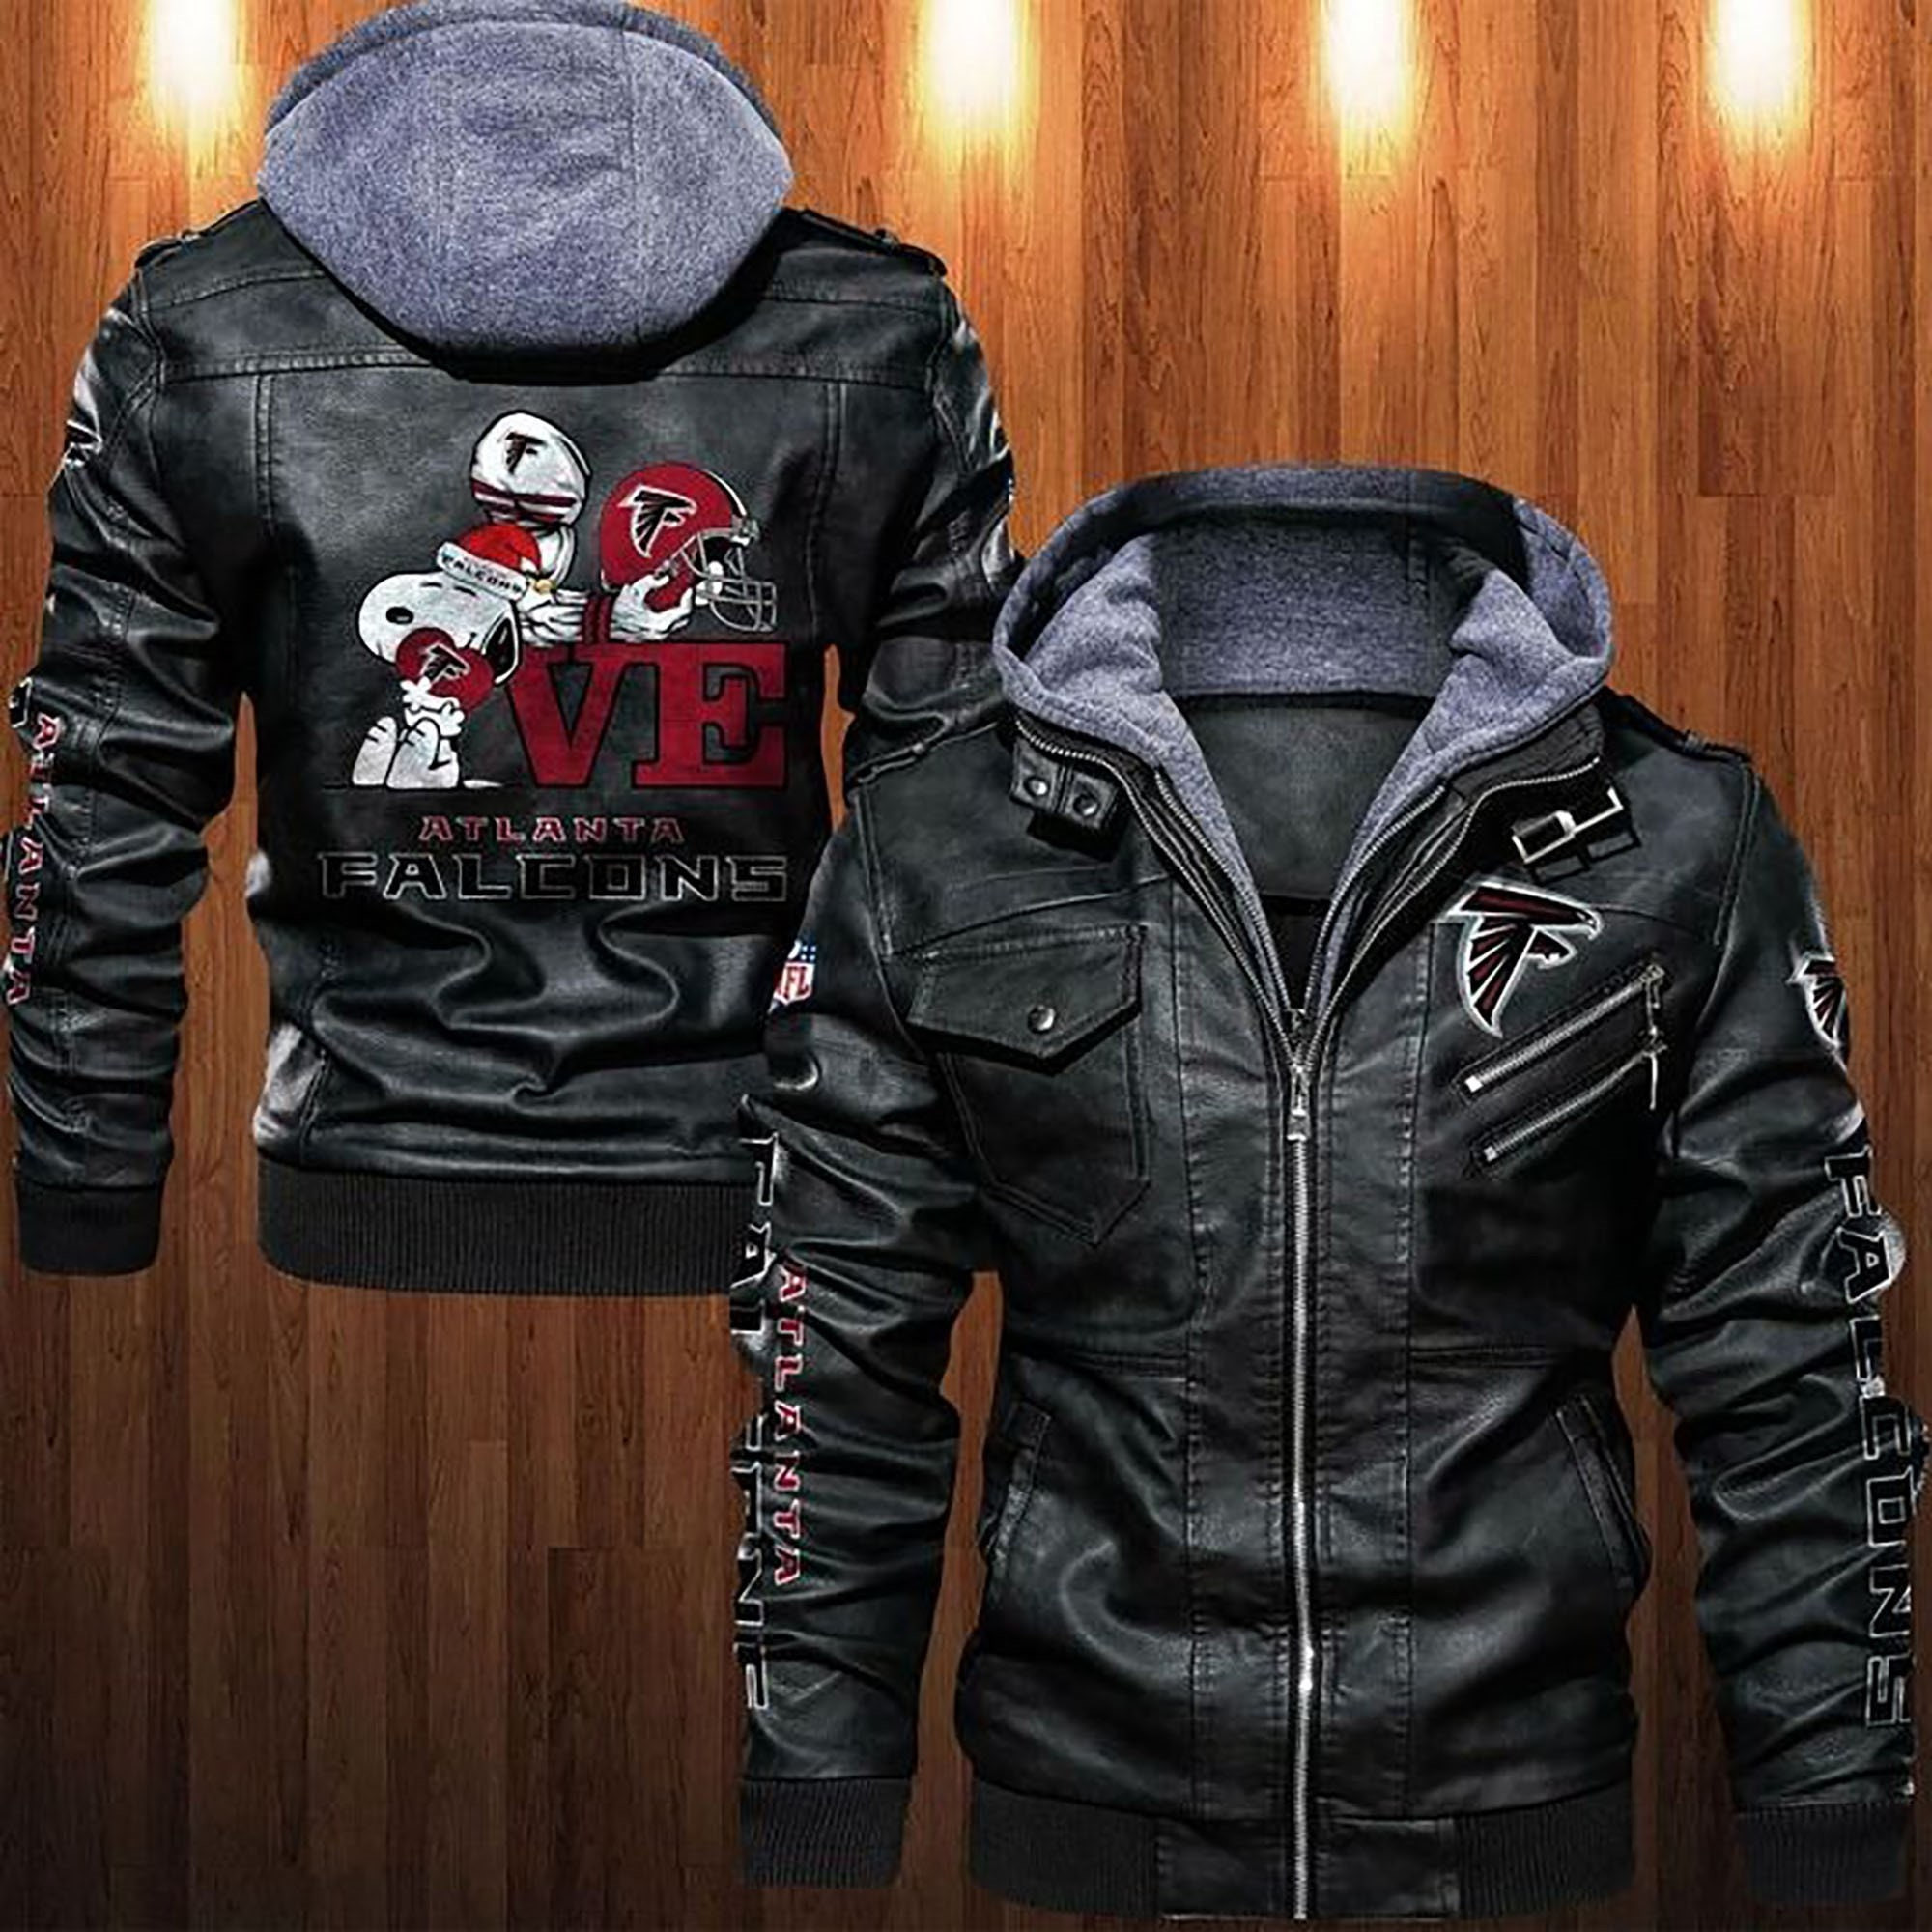 These Amazing Leather Jacket will add to the appeal of your outfit 93